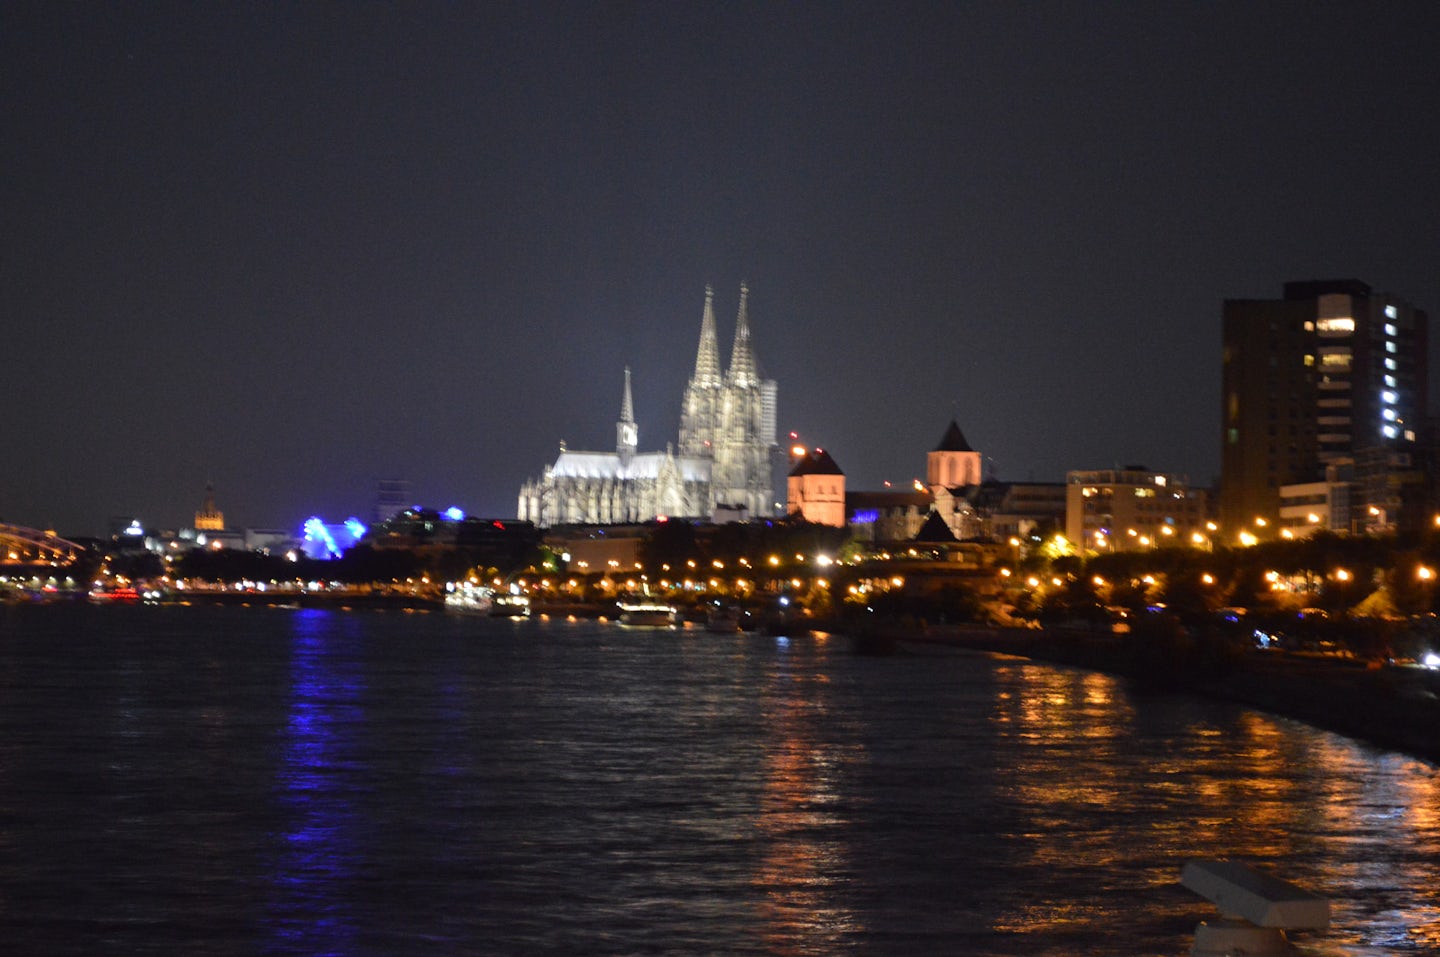 Cologne at night, from Sun/Moon deck.
 full moon and champagne,(not pictur